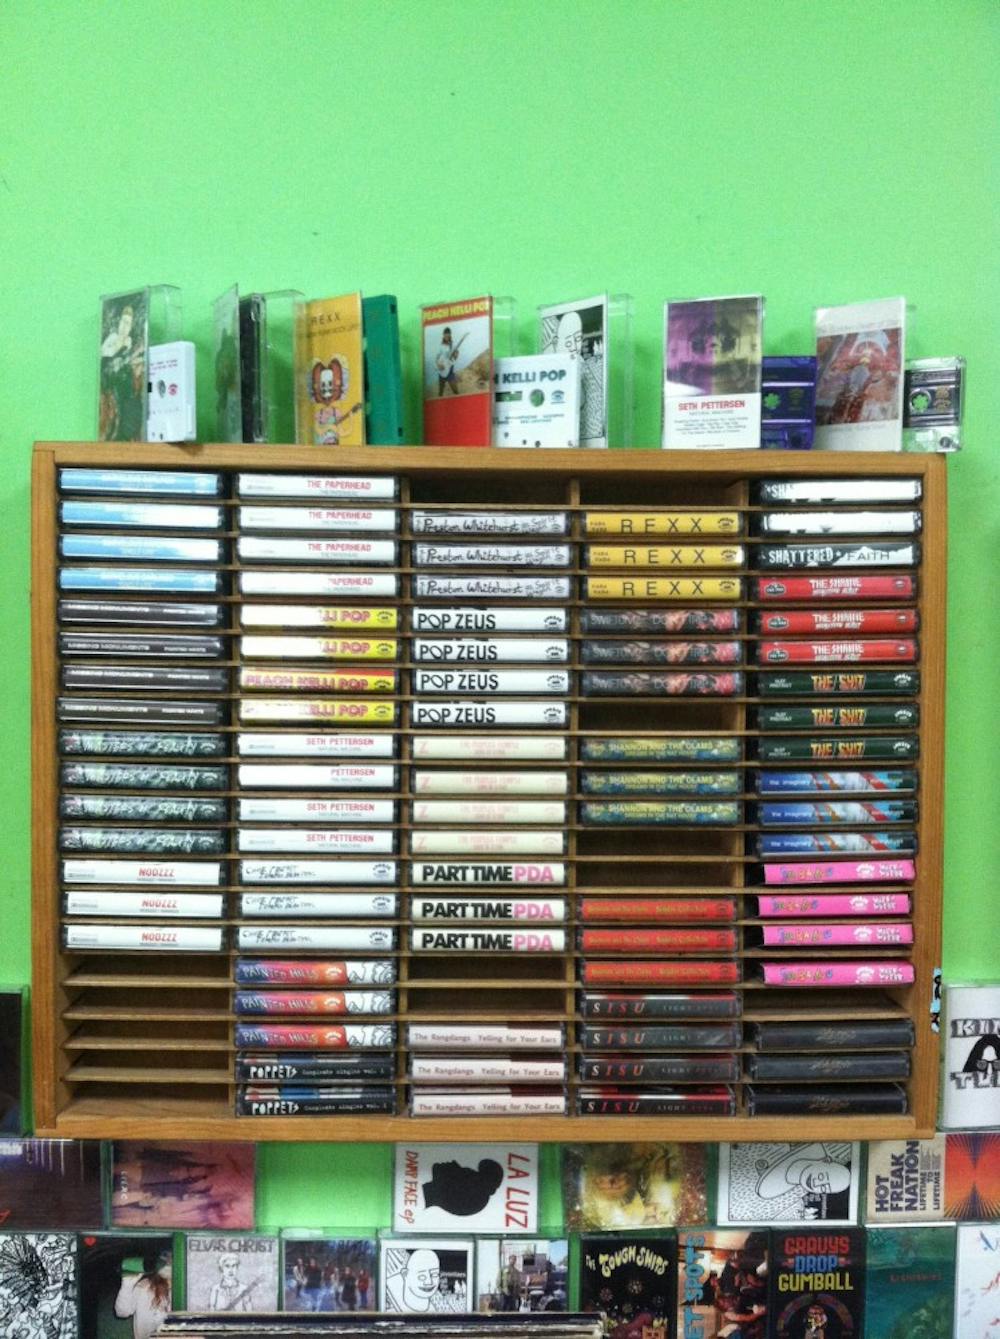 Racks of cassette tapes are found at Burger Records  in Fullerton Calif. Many bands that Burger Records carries intentionally release music on cassette tapes because of their rising popularity. (Photo by Maggie Spear) 